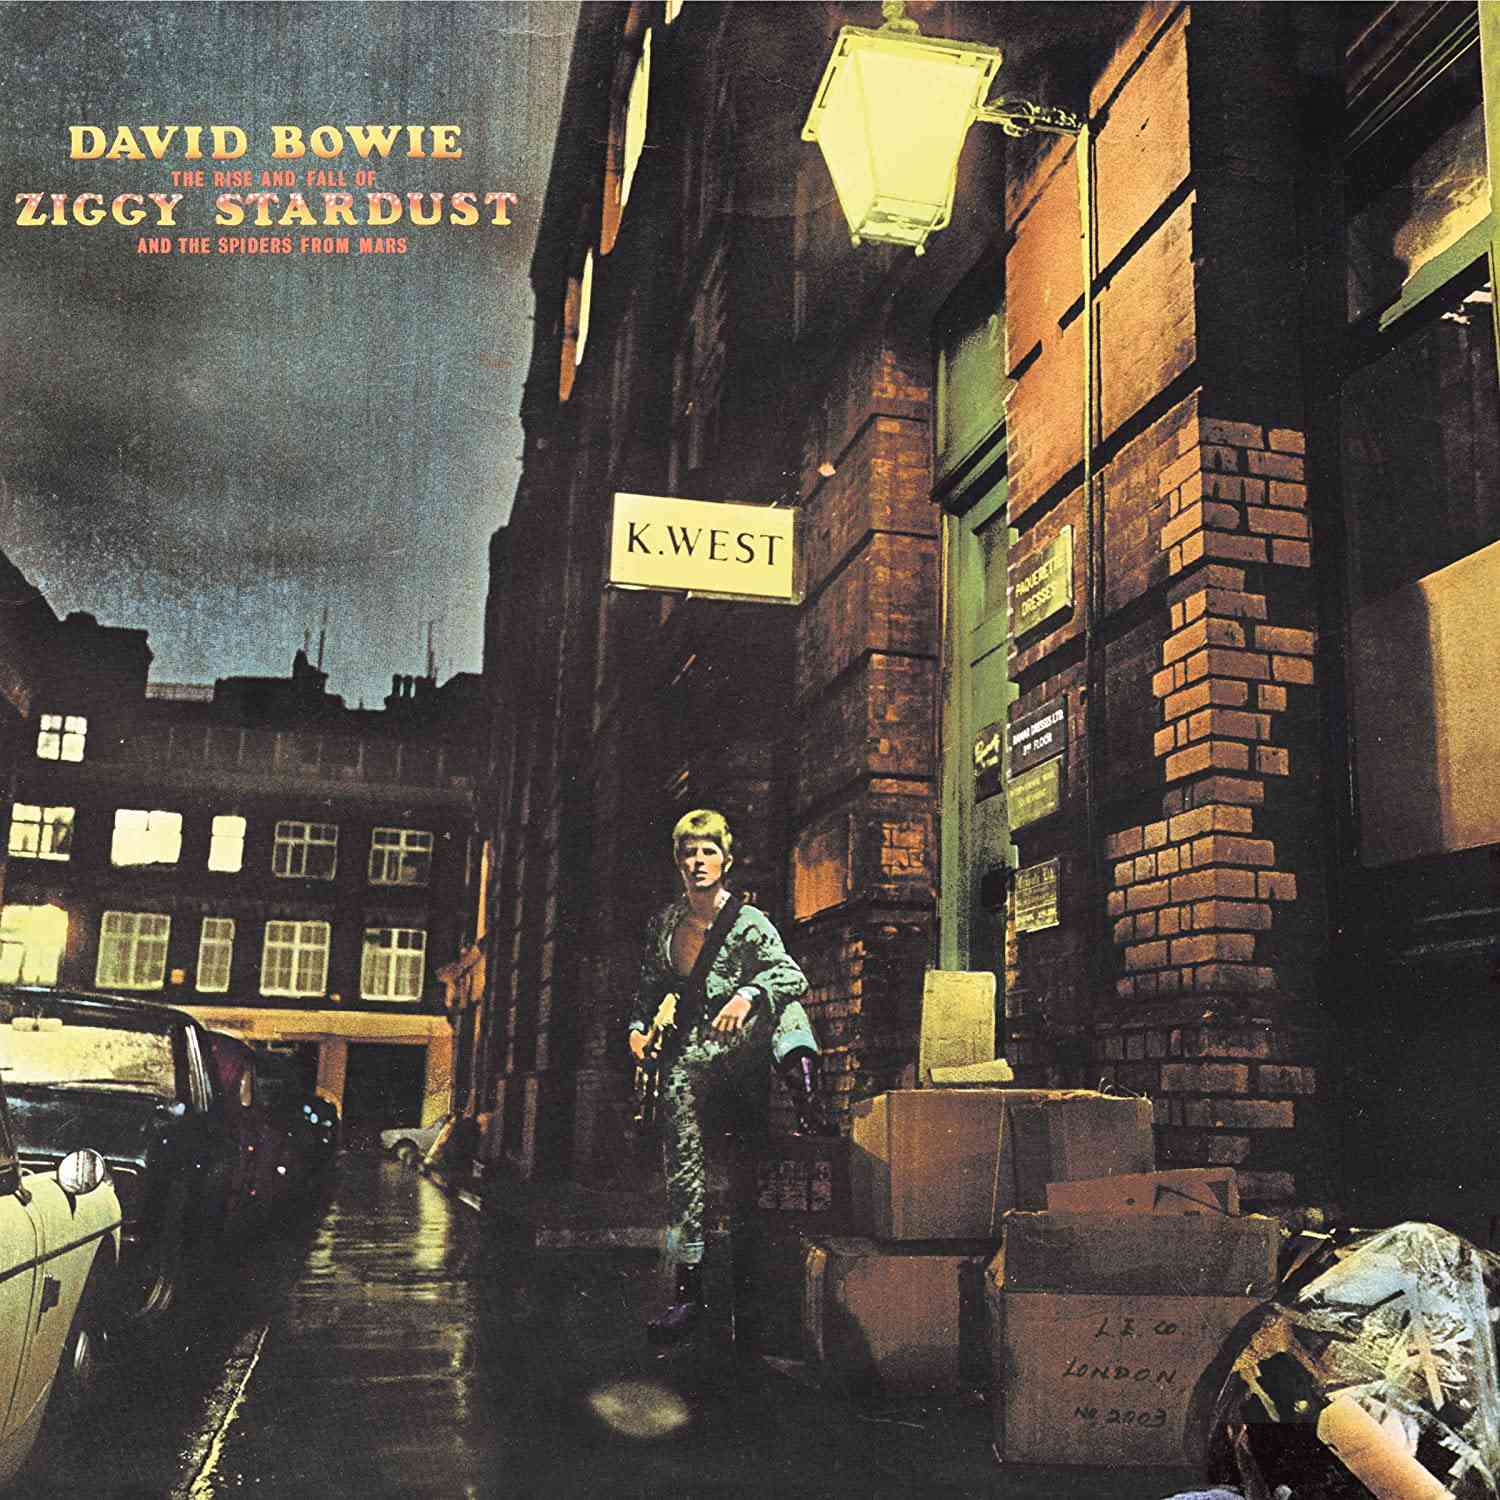 'The Rise and Fall of Ziggy Stardust and the Spiders From Mars'